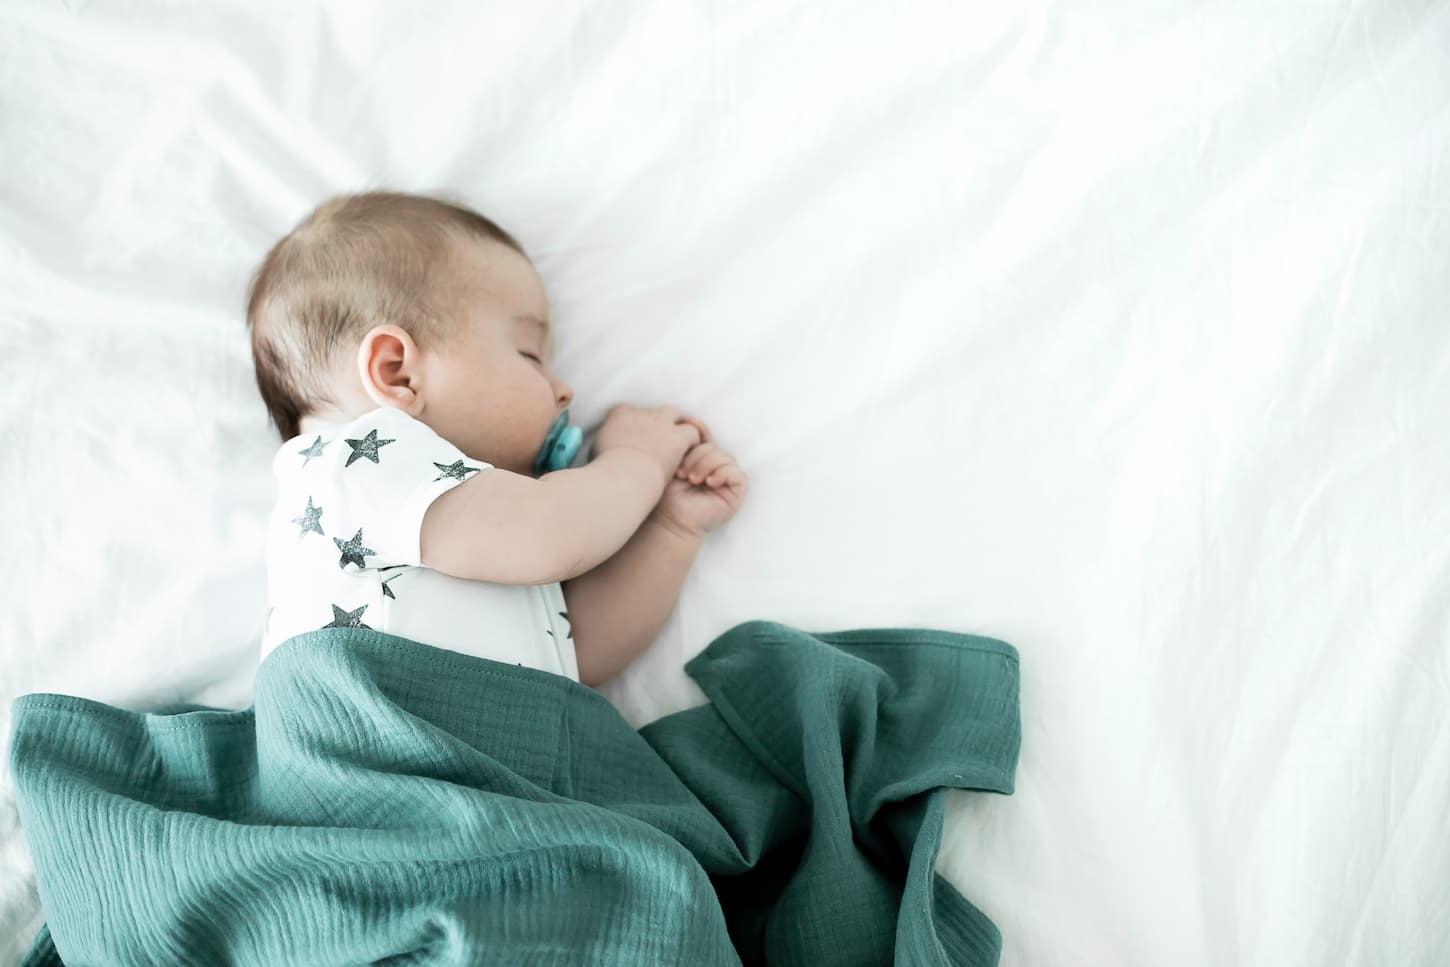 An image of a 3-month-old baby sucking a pacifier and sleeping alone on a bed covered with a green blanket.